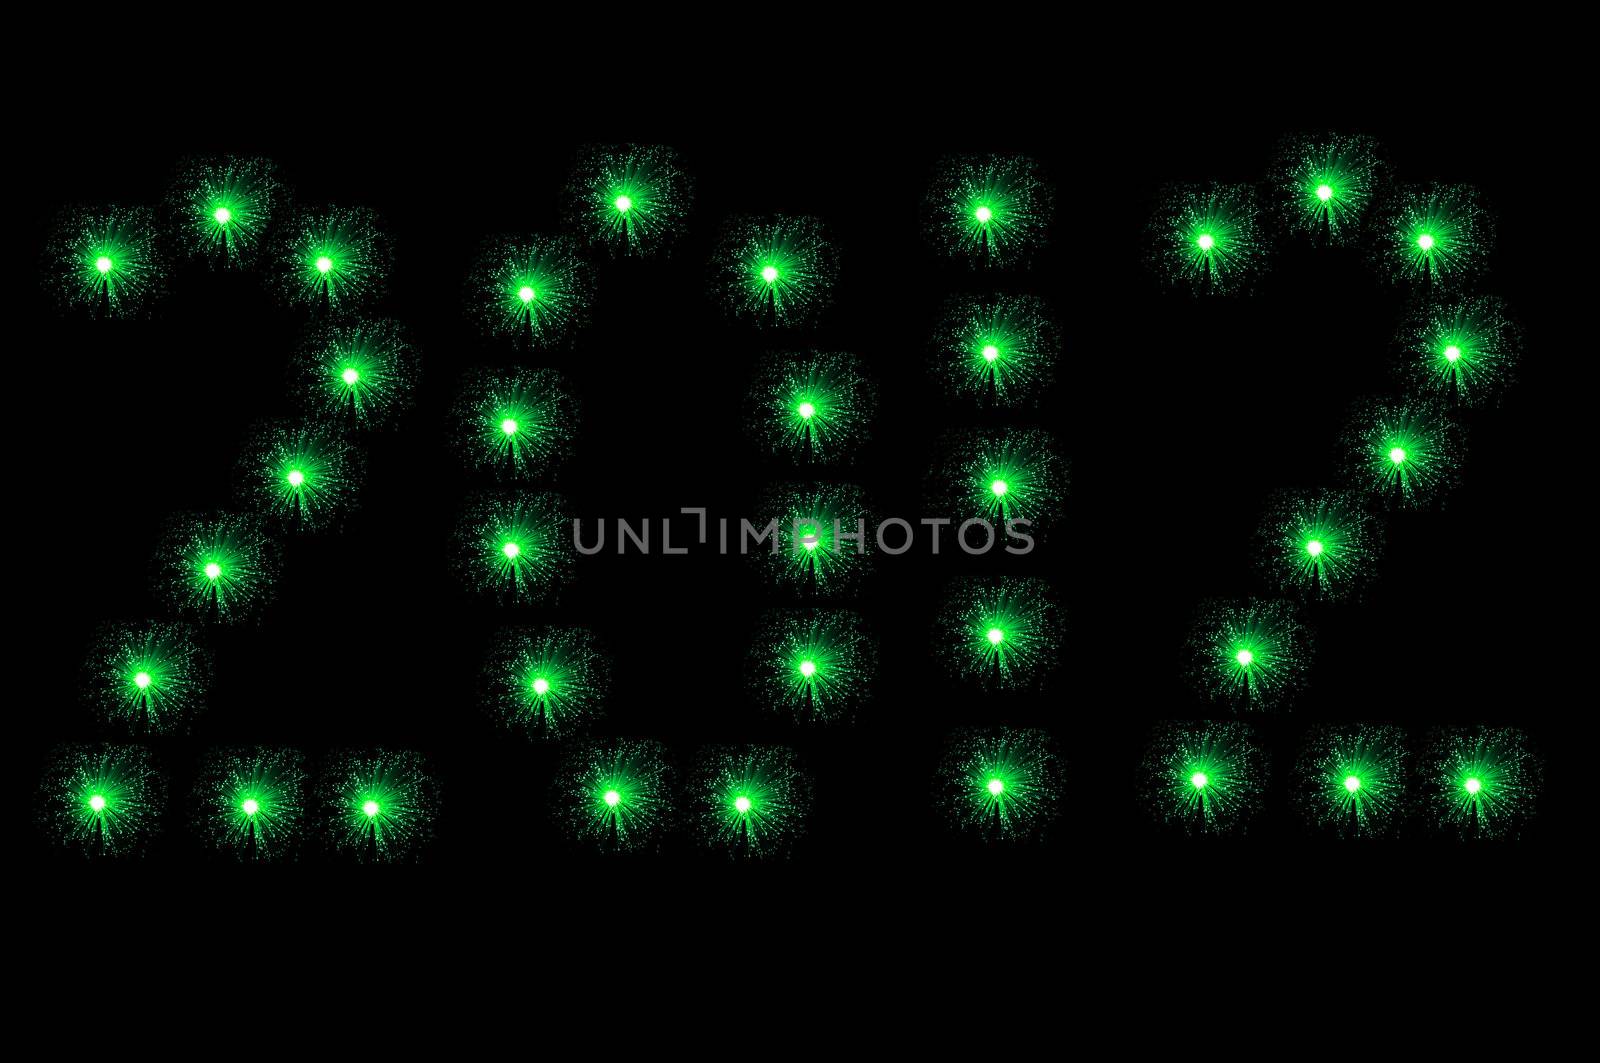 Many small illuminated green fibre optic lamps arranged on black background to spell the number 2012